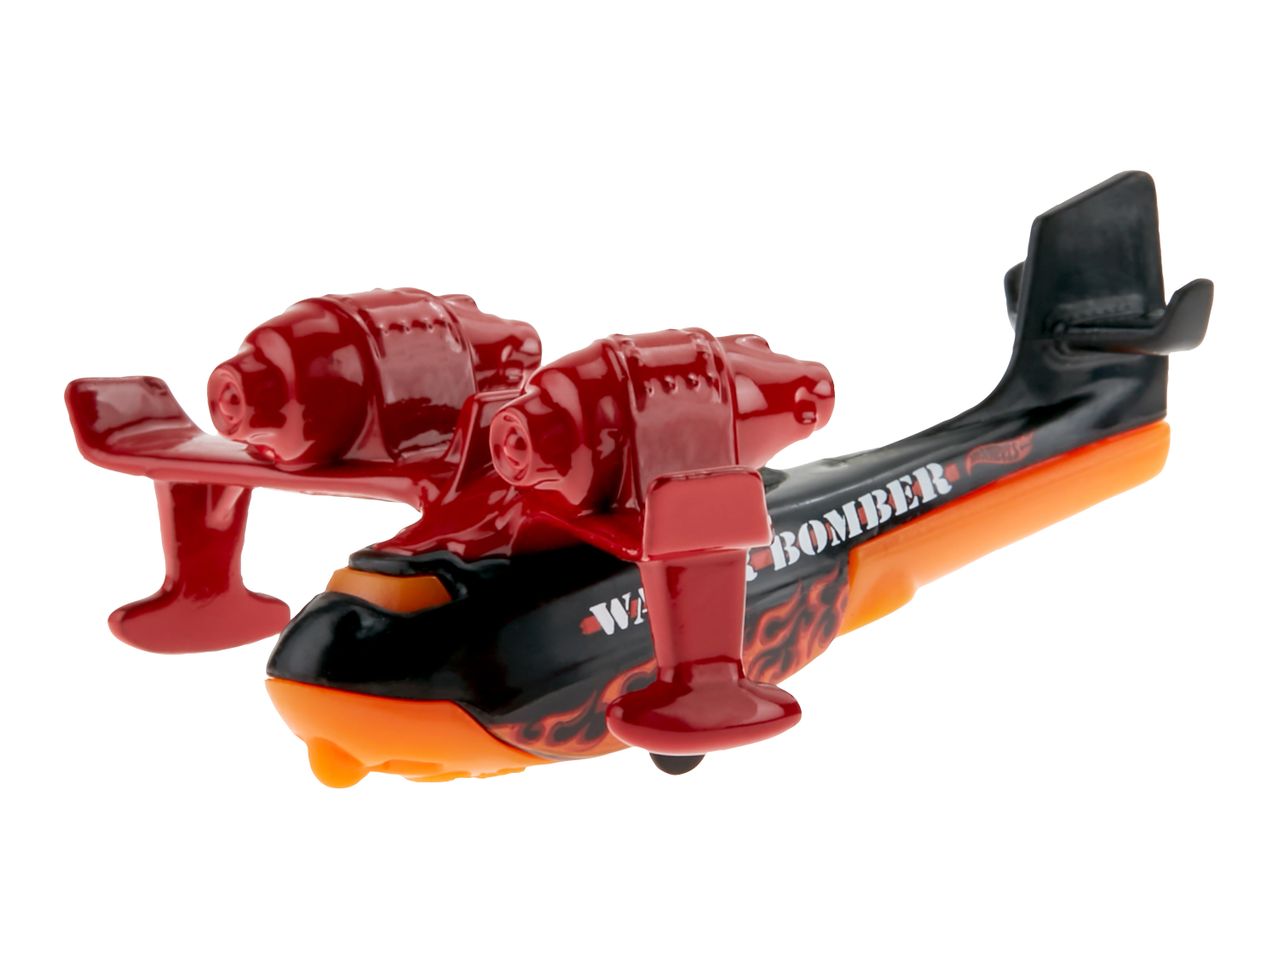 Go to full screen view: Hot Wheels Car - Image 13